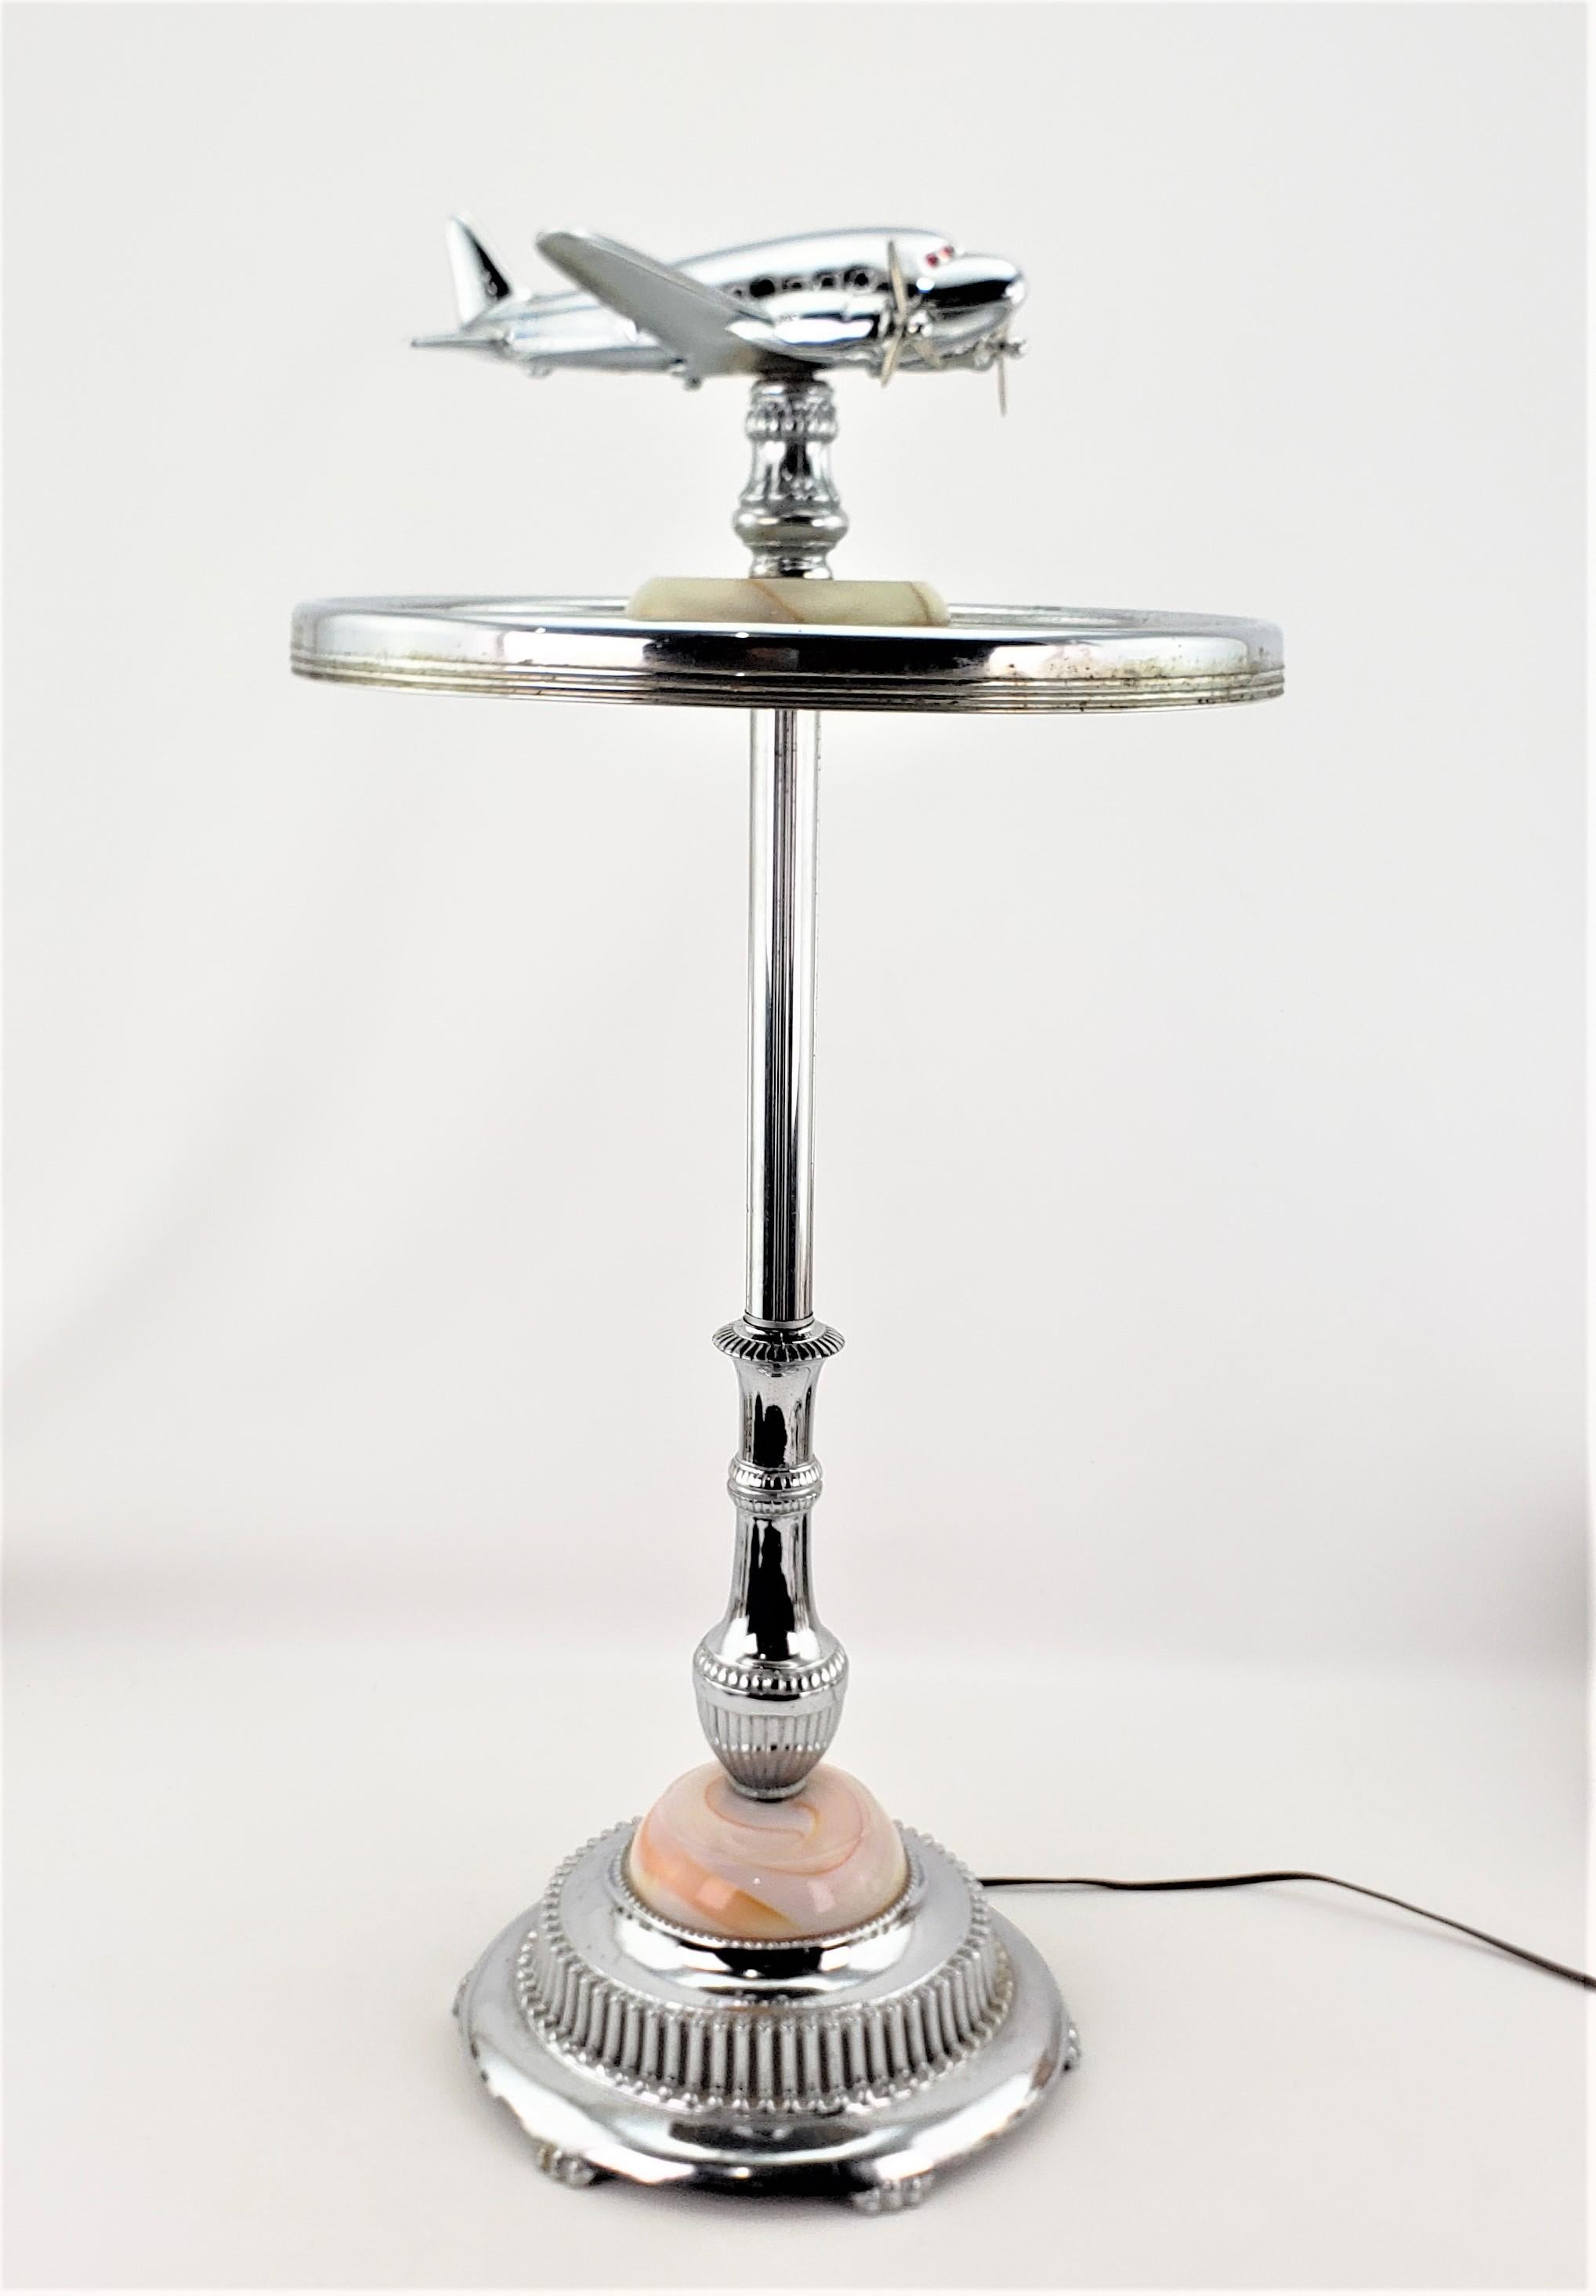 This very unique lighted smoker's stand is unsigned, but presumed to have been made in North America, likely the United States, in approximately 1950 in an Art Deco style. This smoker's stand is done in chromed metal with a streamlined and stylized